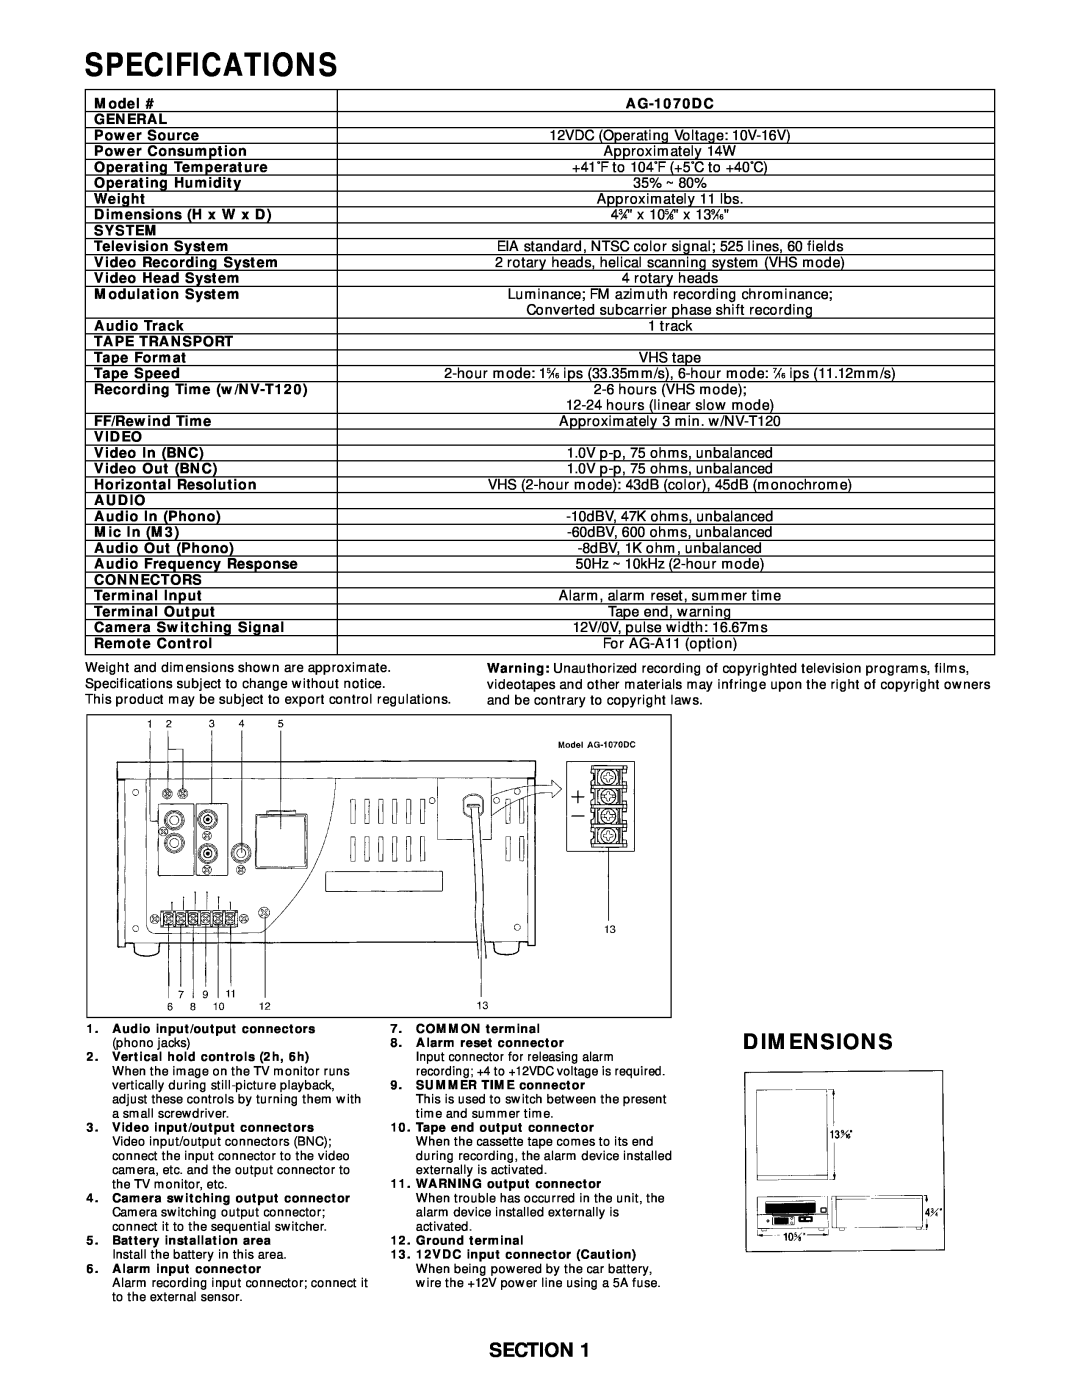 Panasonic AG-1070DC specifications Specifications, Dimensions, Section 